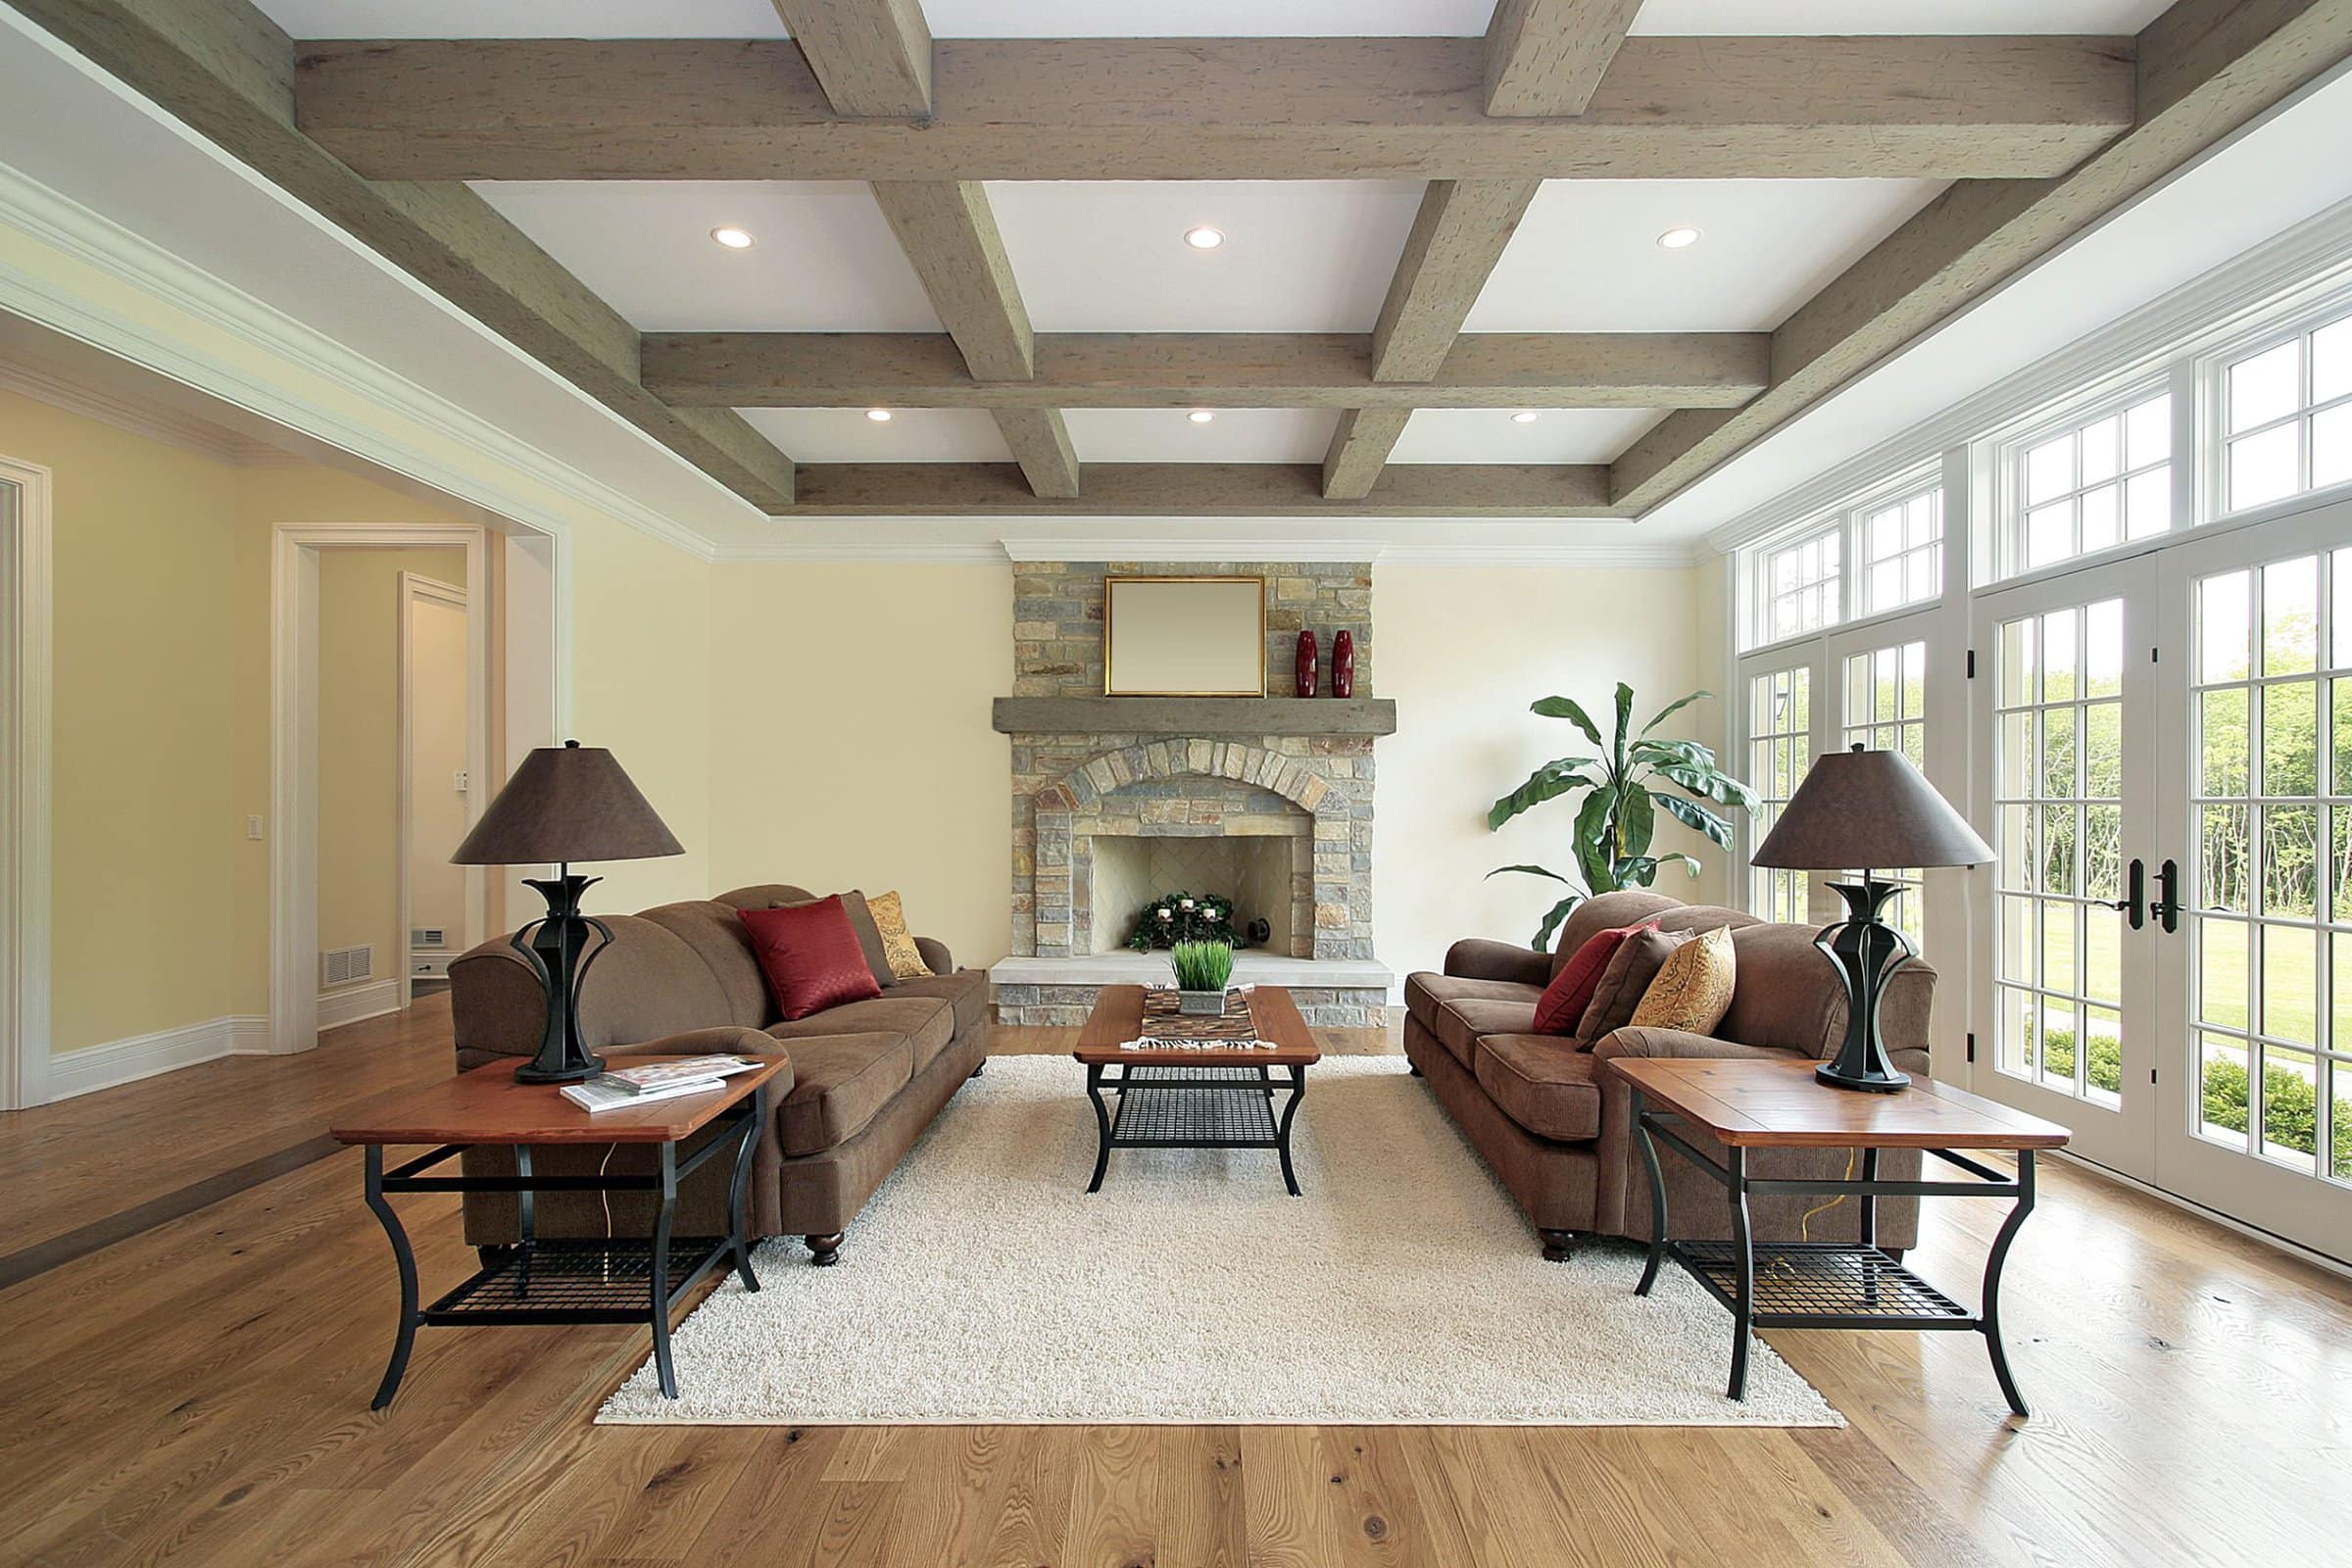  Gray Ceiling Beams Look Lovely and Very Neutral scaled